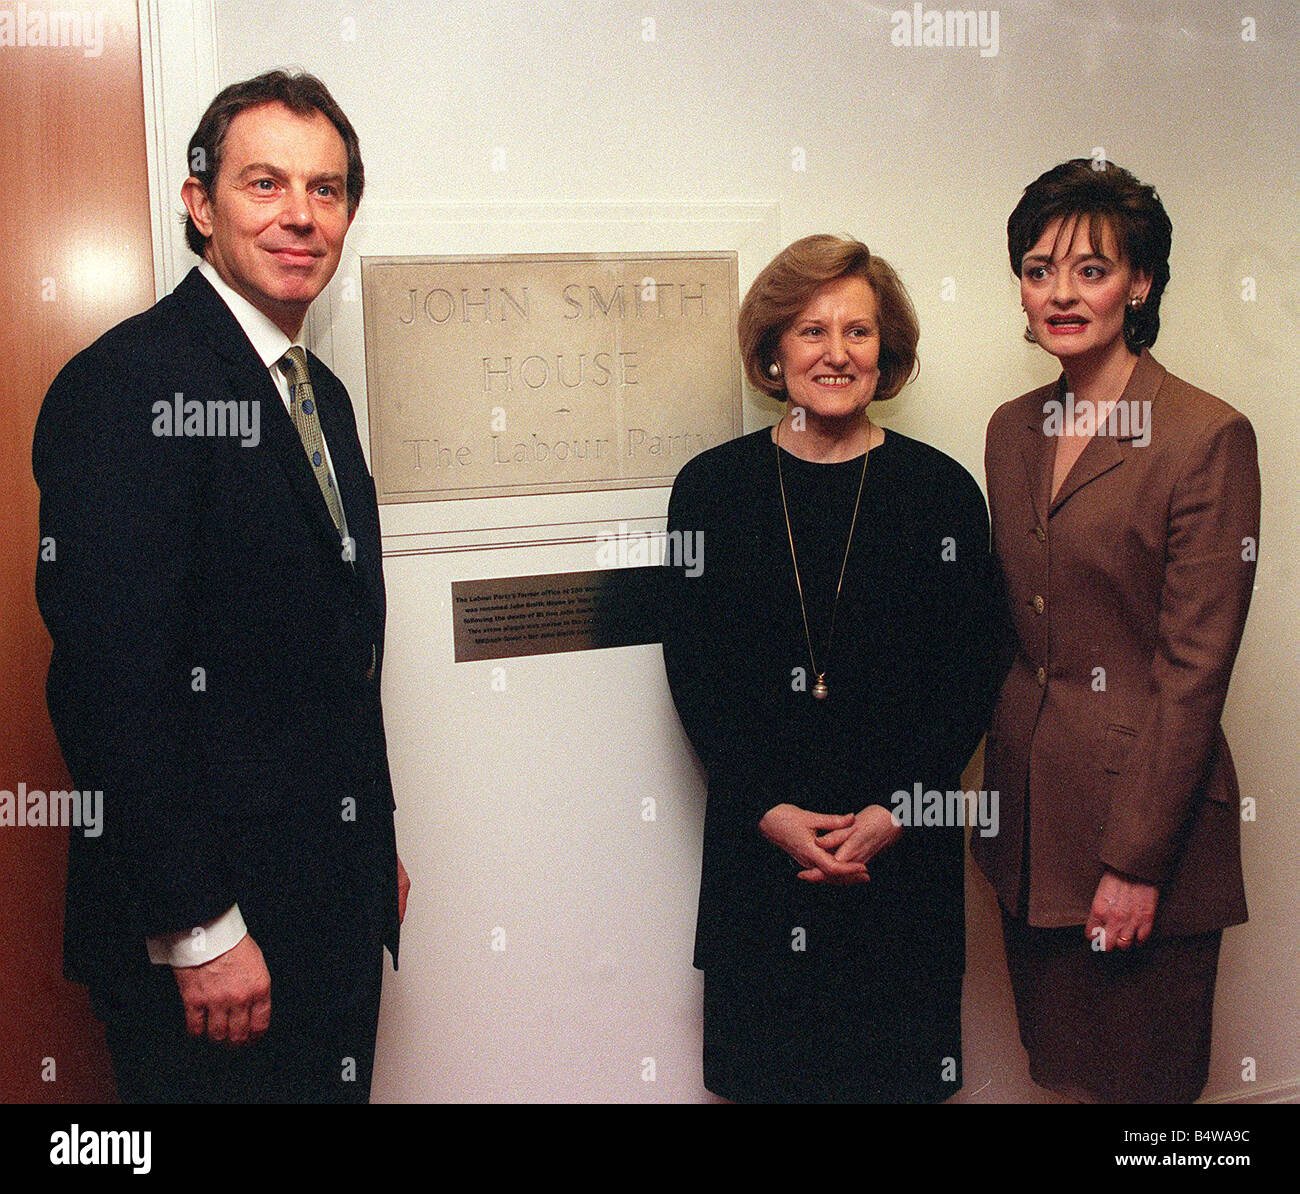 Tony Blair unviels the John Smith plaque at the Labour Party headquarters Millbank Tower watched by Elizabeth Smith now Baroness Smith of Gilmorehill and his wife Cherie 24 3 98 Stock Photo